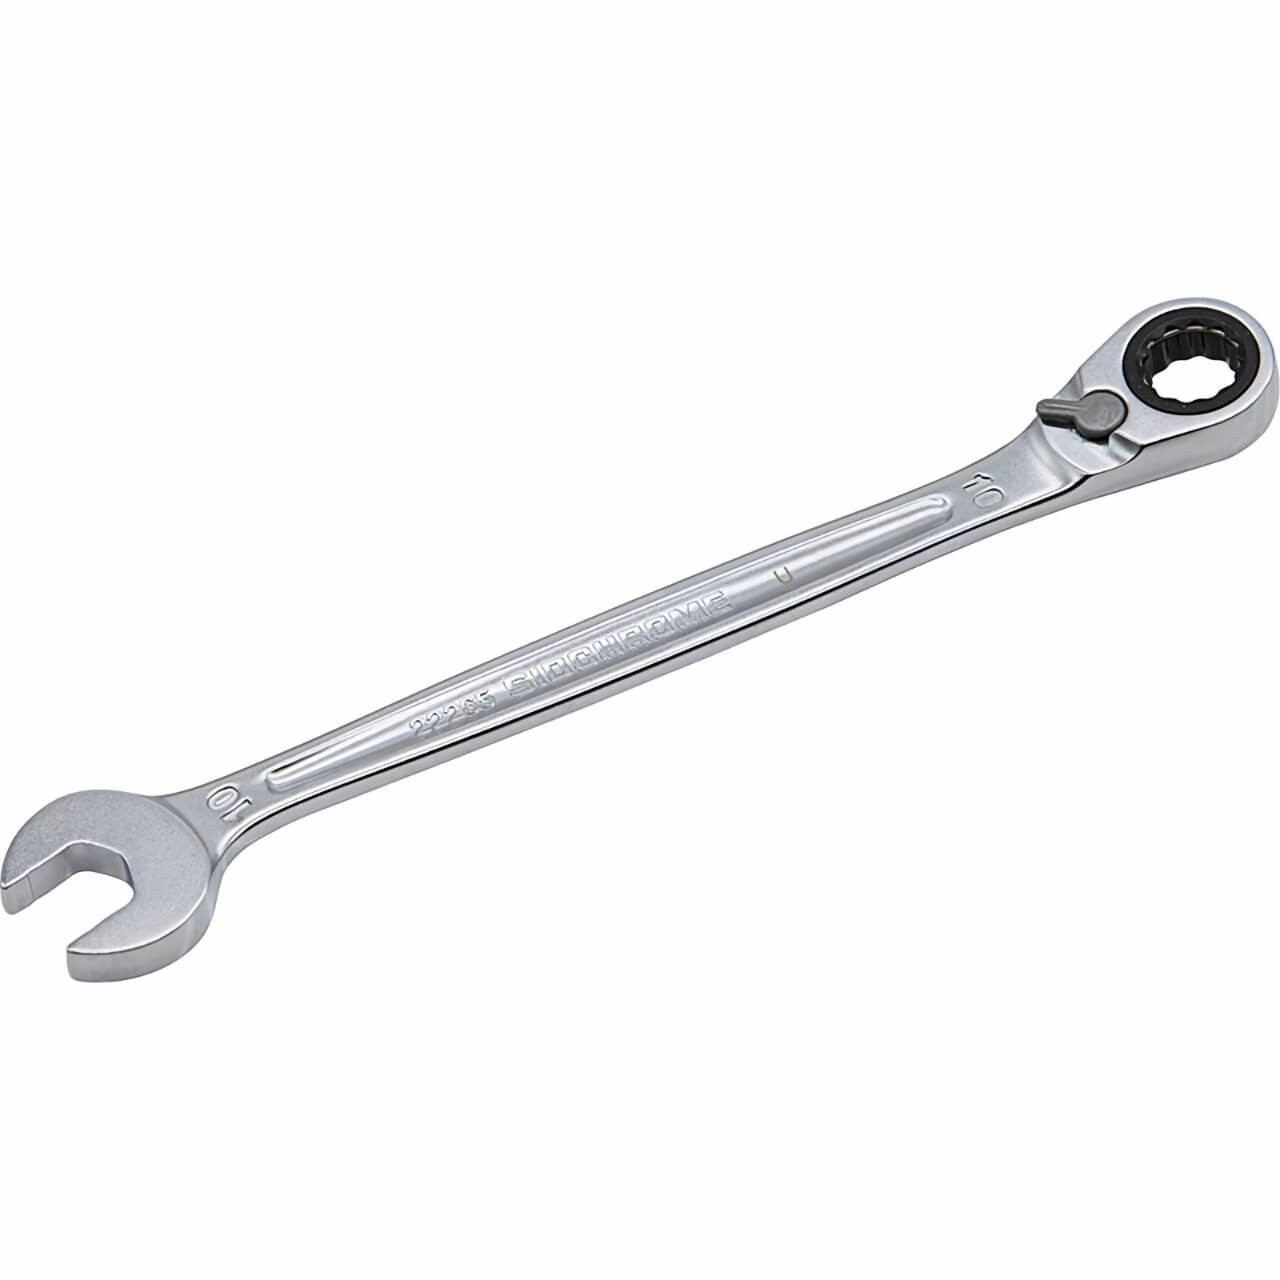 Sidchrome 14mm 467 Pro Series Reversible Combination Geared Spanner Metric